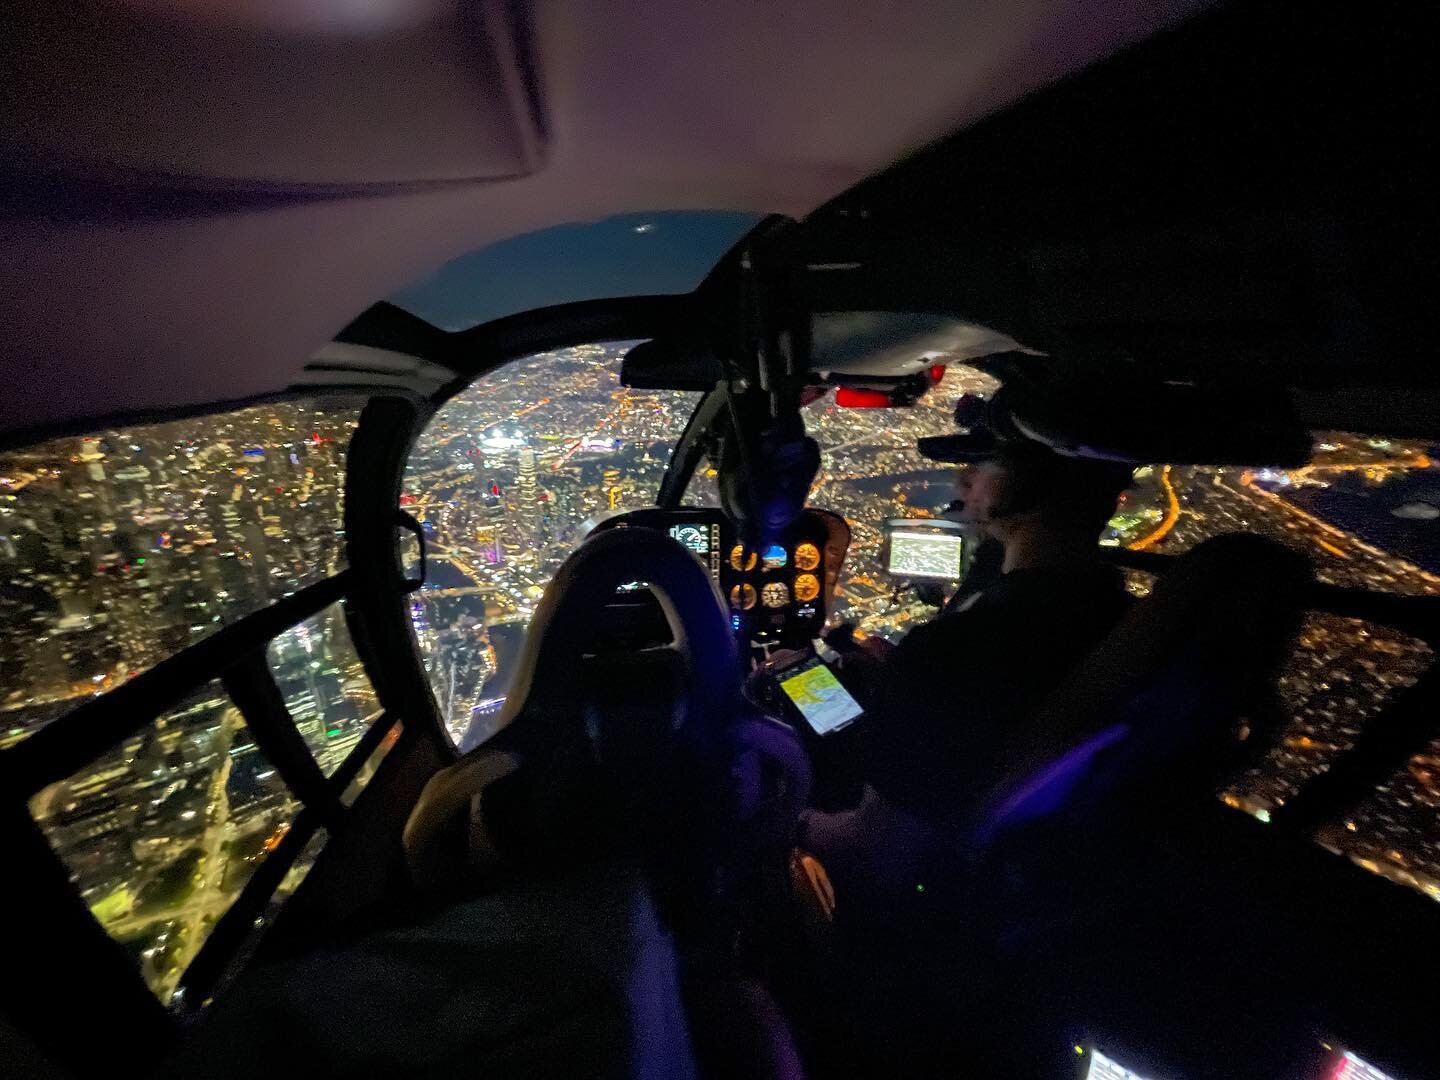 Night ops filming 🙌

#aerialfilming #helicopter #helicopterfilming #nightops #airbus #melbourne #australia #behindthebroadcast #outsidebroadcast #filming #behindthescenes #societyofcameraoperators #gss #settingthestandard #filmcrew #setlife #pilot #